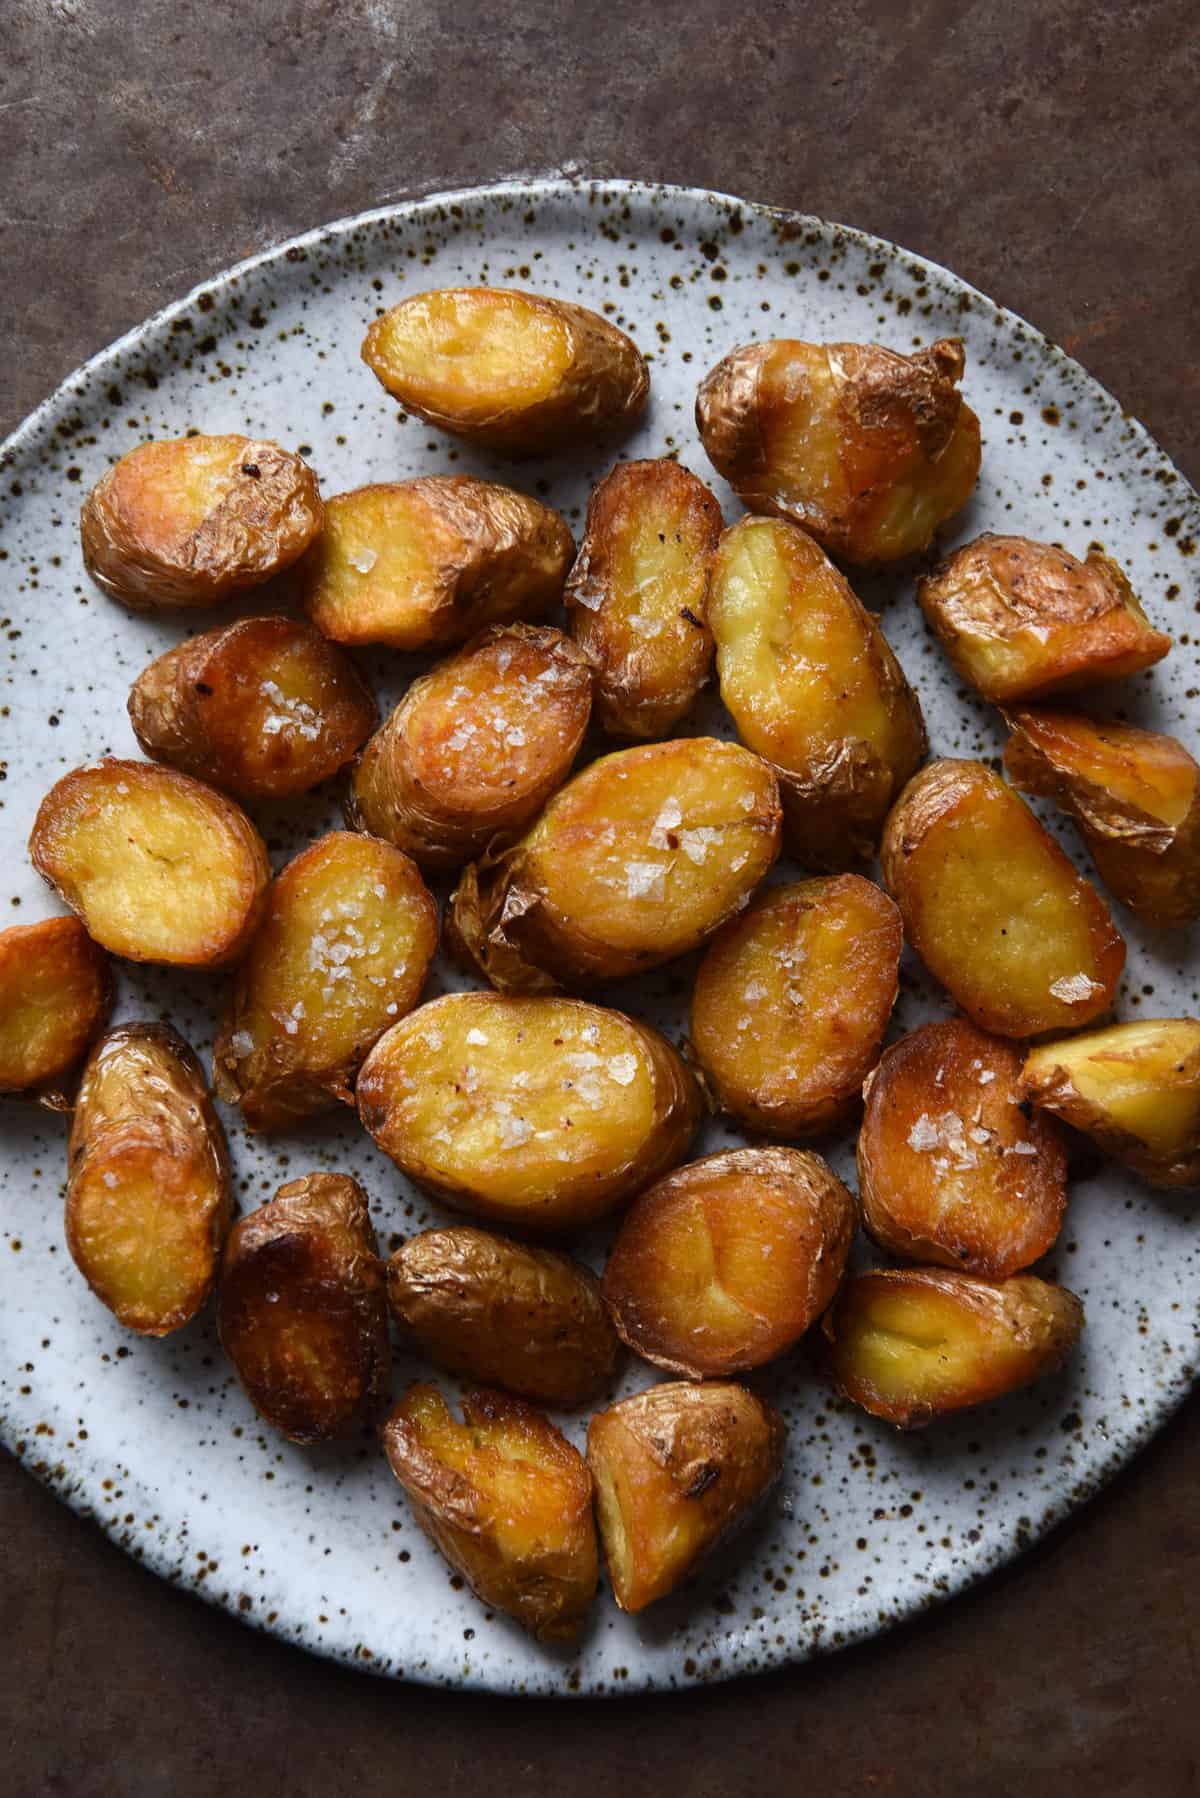 A close up aerial image of crispy, golden brown kipfler potatoes on a white speckled ceramic plate atop a mottled rust coloured backdrop. The potatoes are crispy and topped with flecks of sea salt flakes.